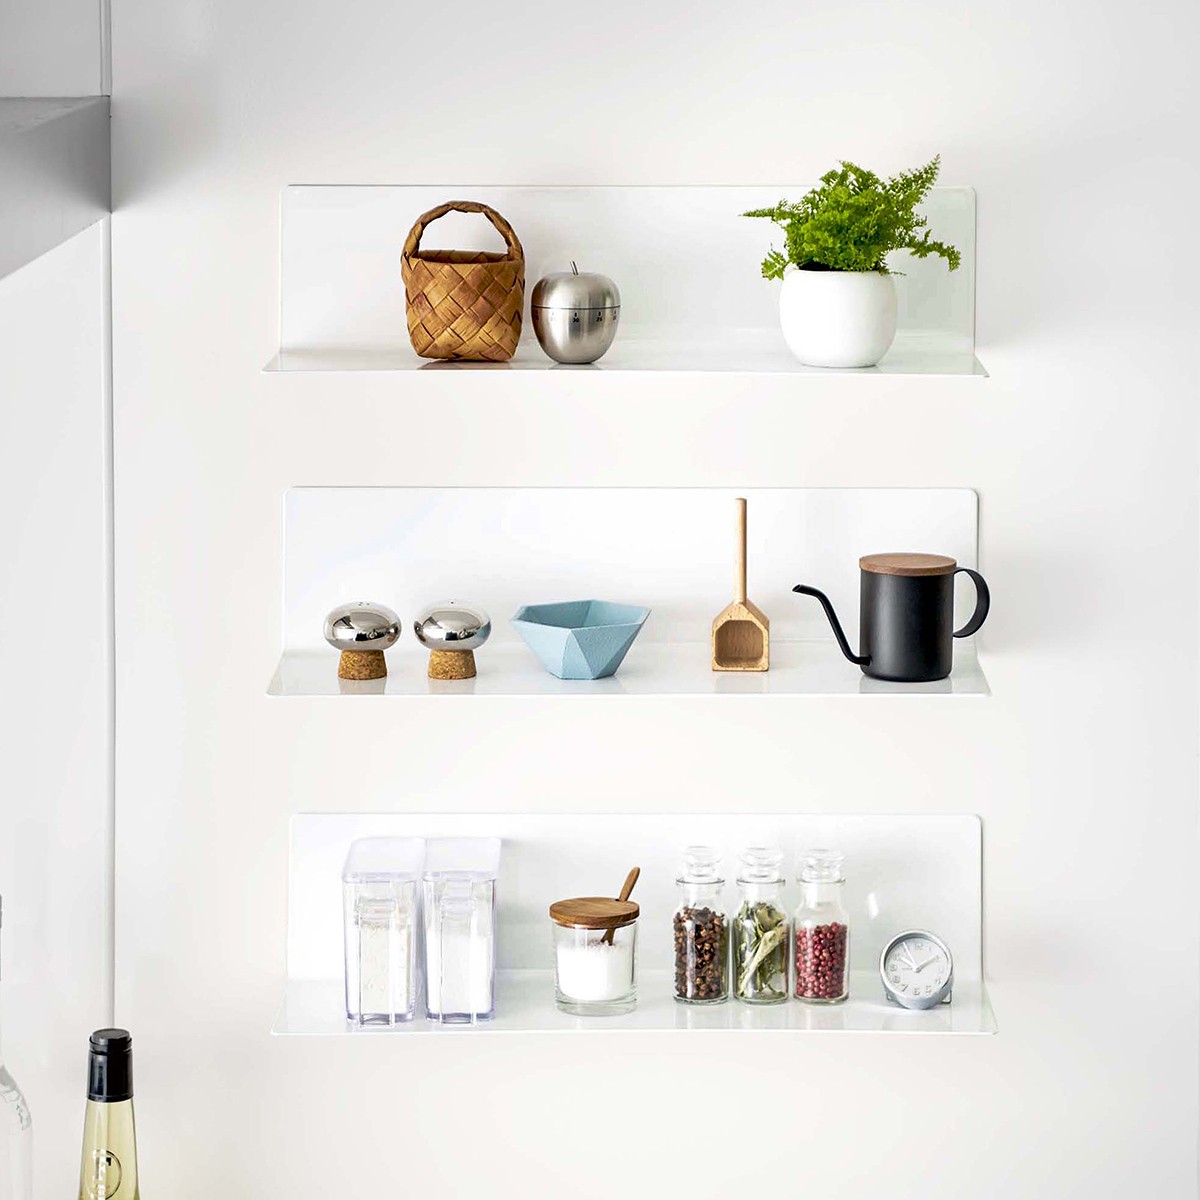  with special favor [ magnet kitchen shelves wide tower ] Yamazaki real industry tower magnet kitchen storage wall surface storage wall surface shelves rack magnet kitchen articles kitchen supplies 5078 5079